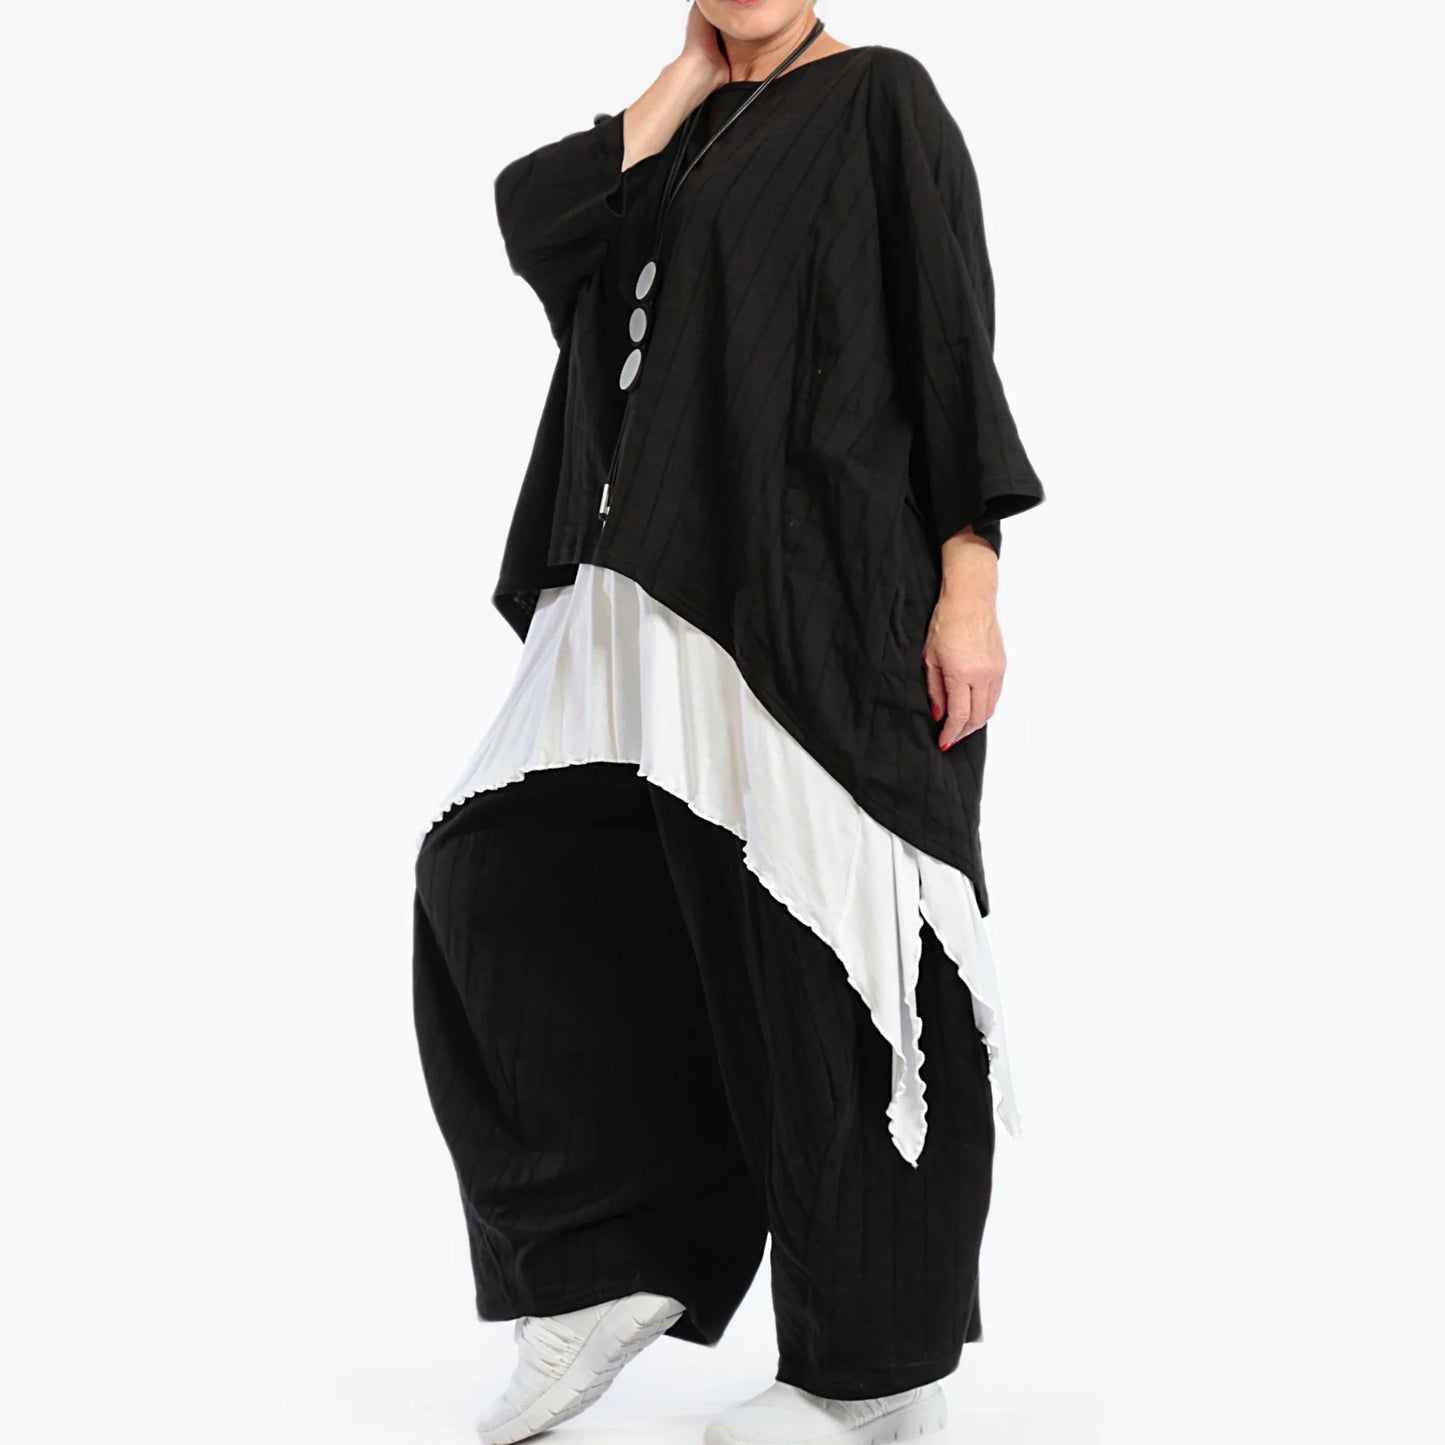 Everyday big shirt in a boxy shape made of fine jersey quality, viscose basics in black